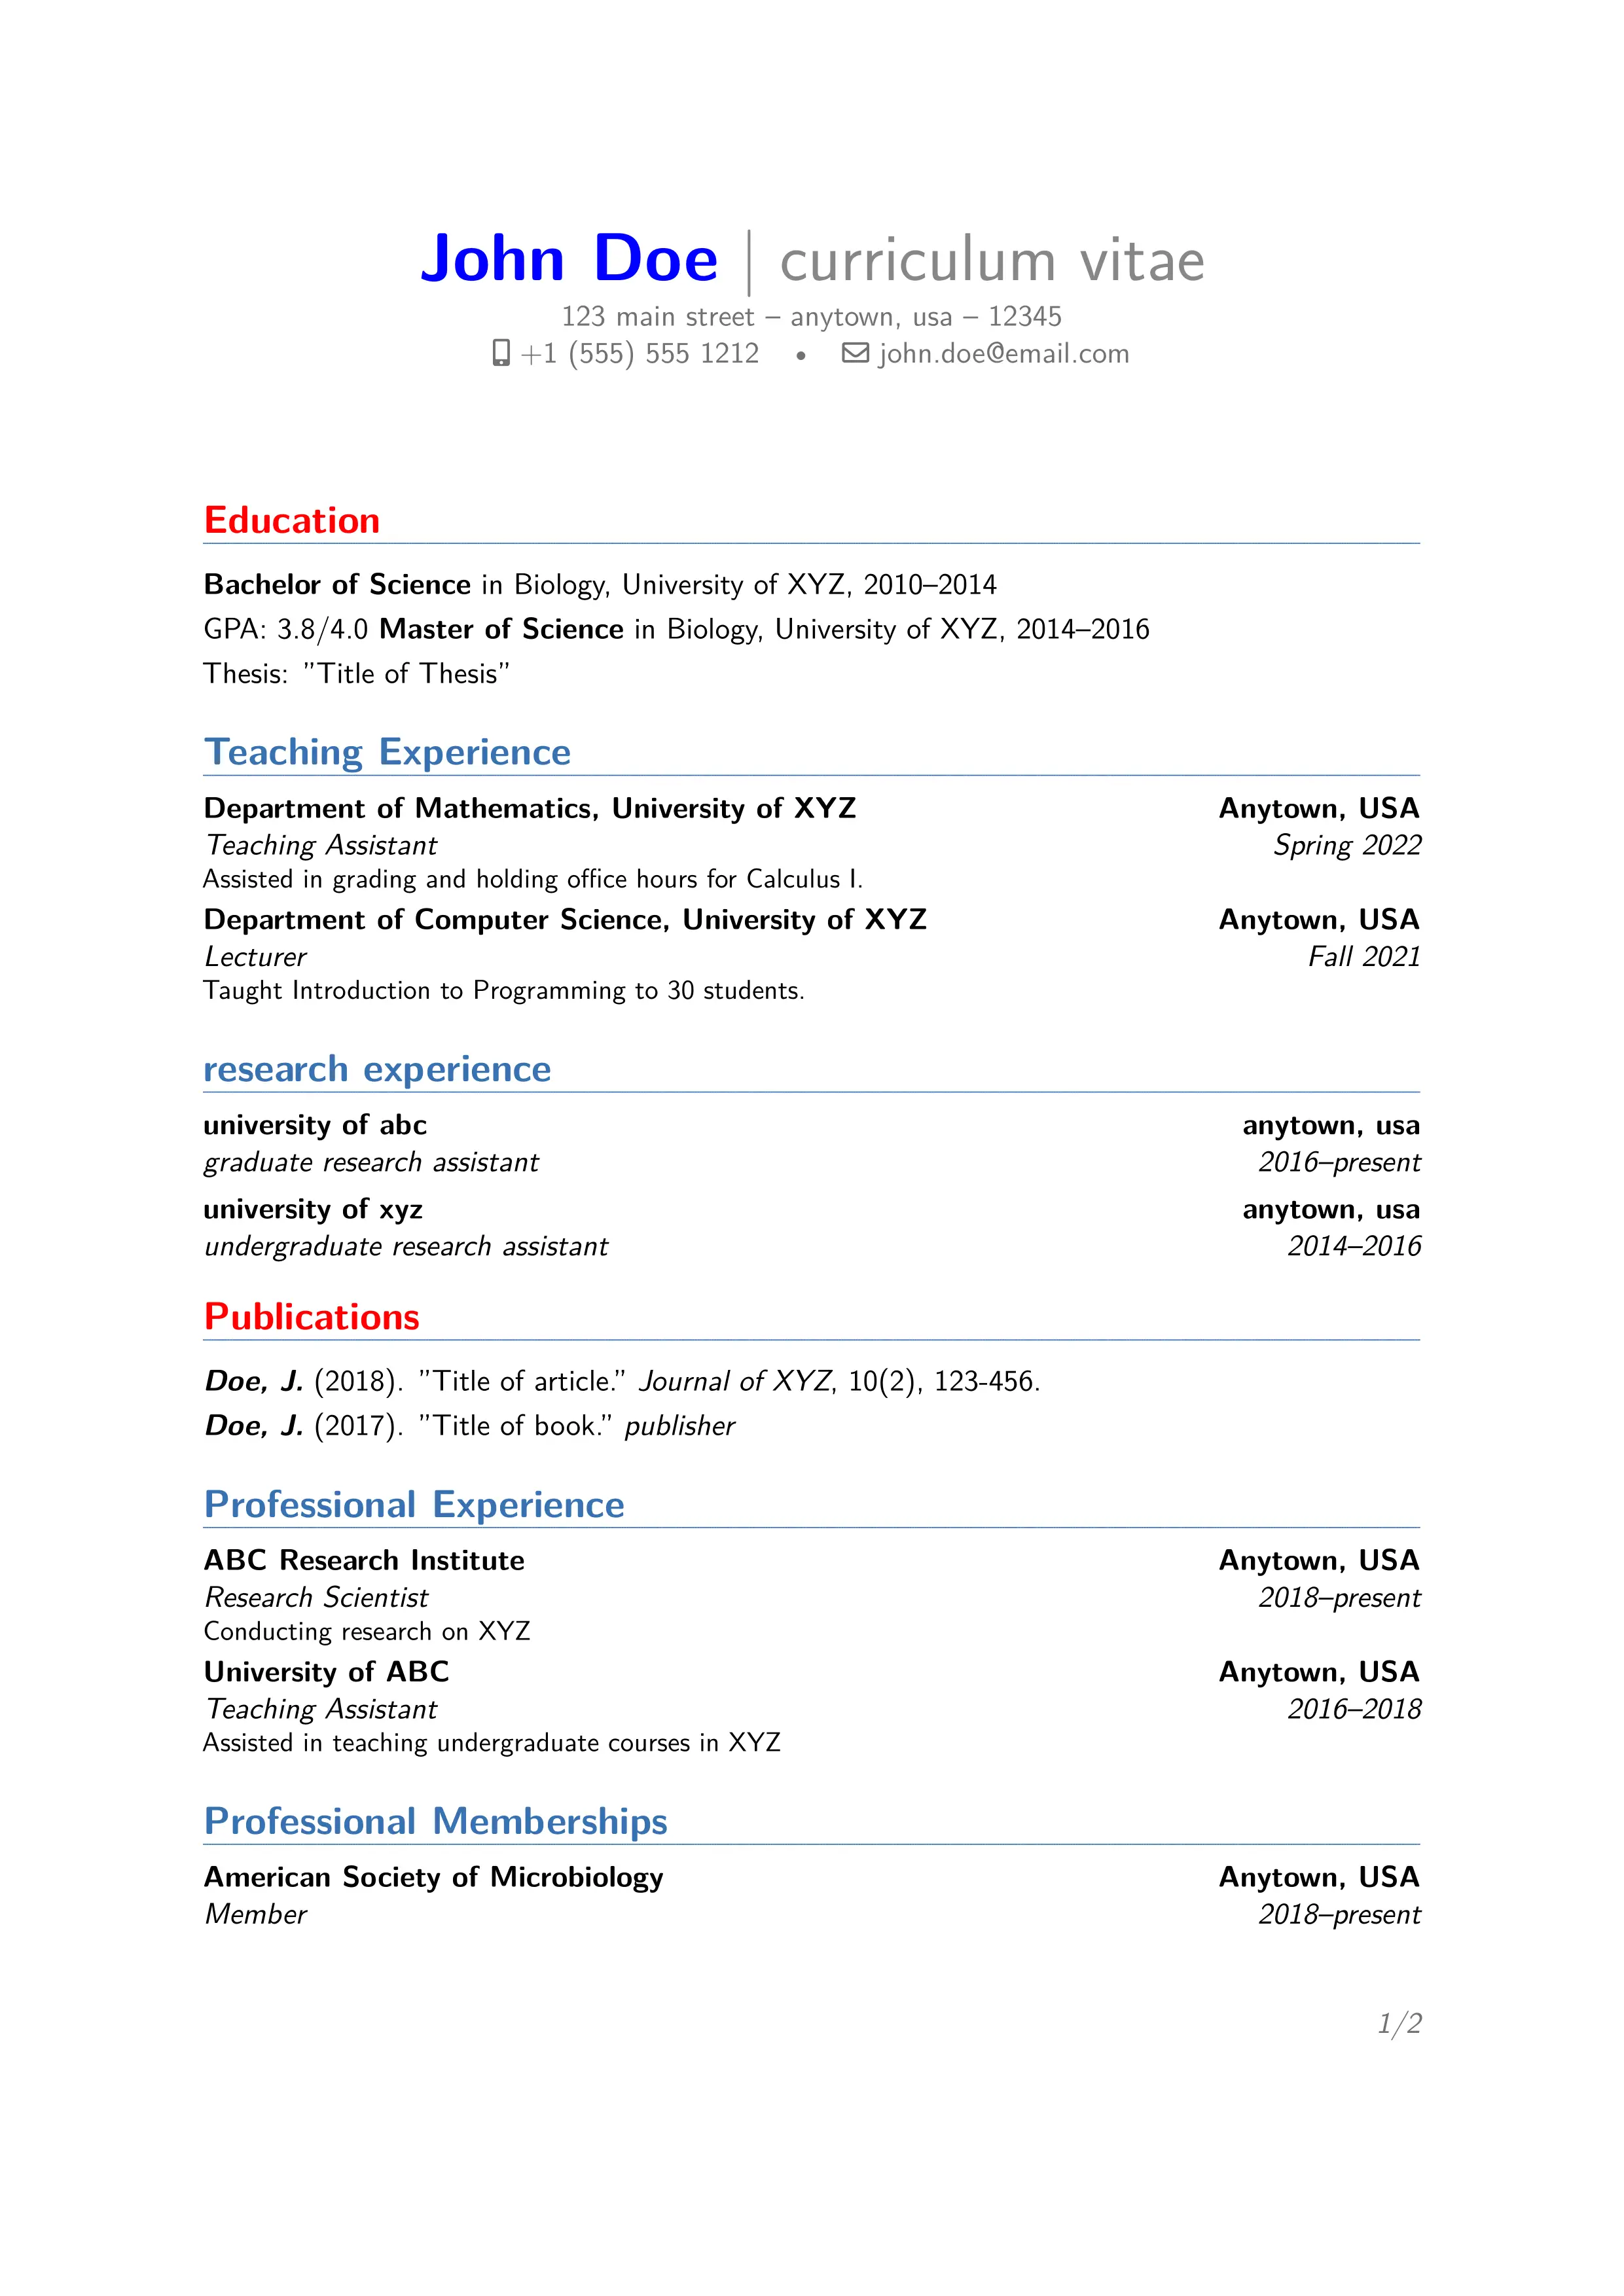 professional CV created with latex